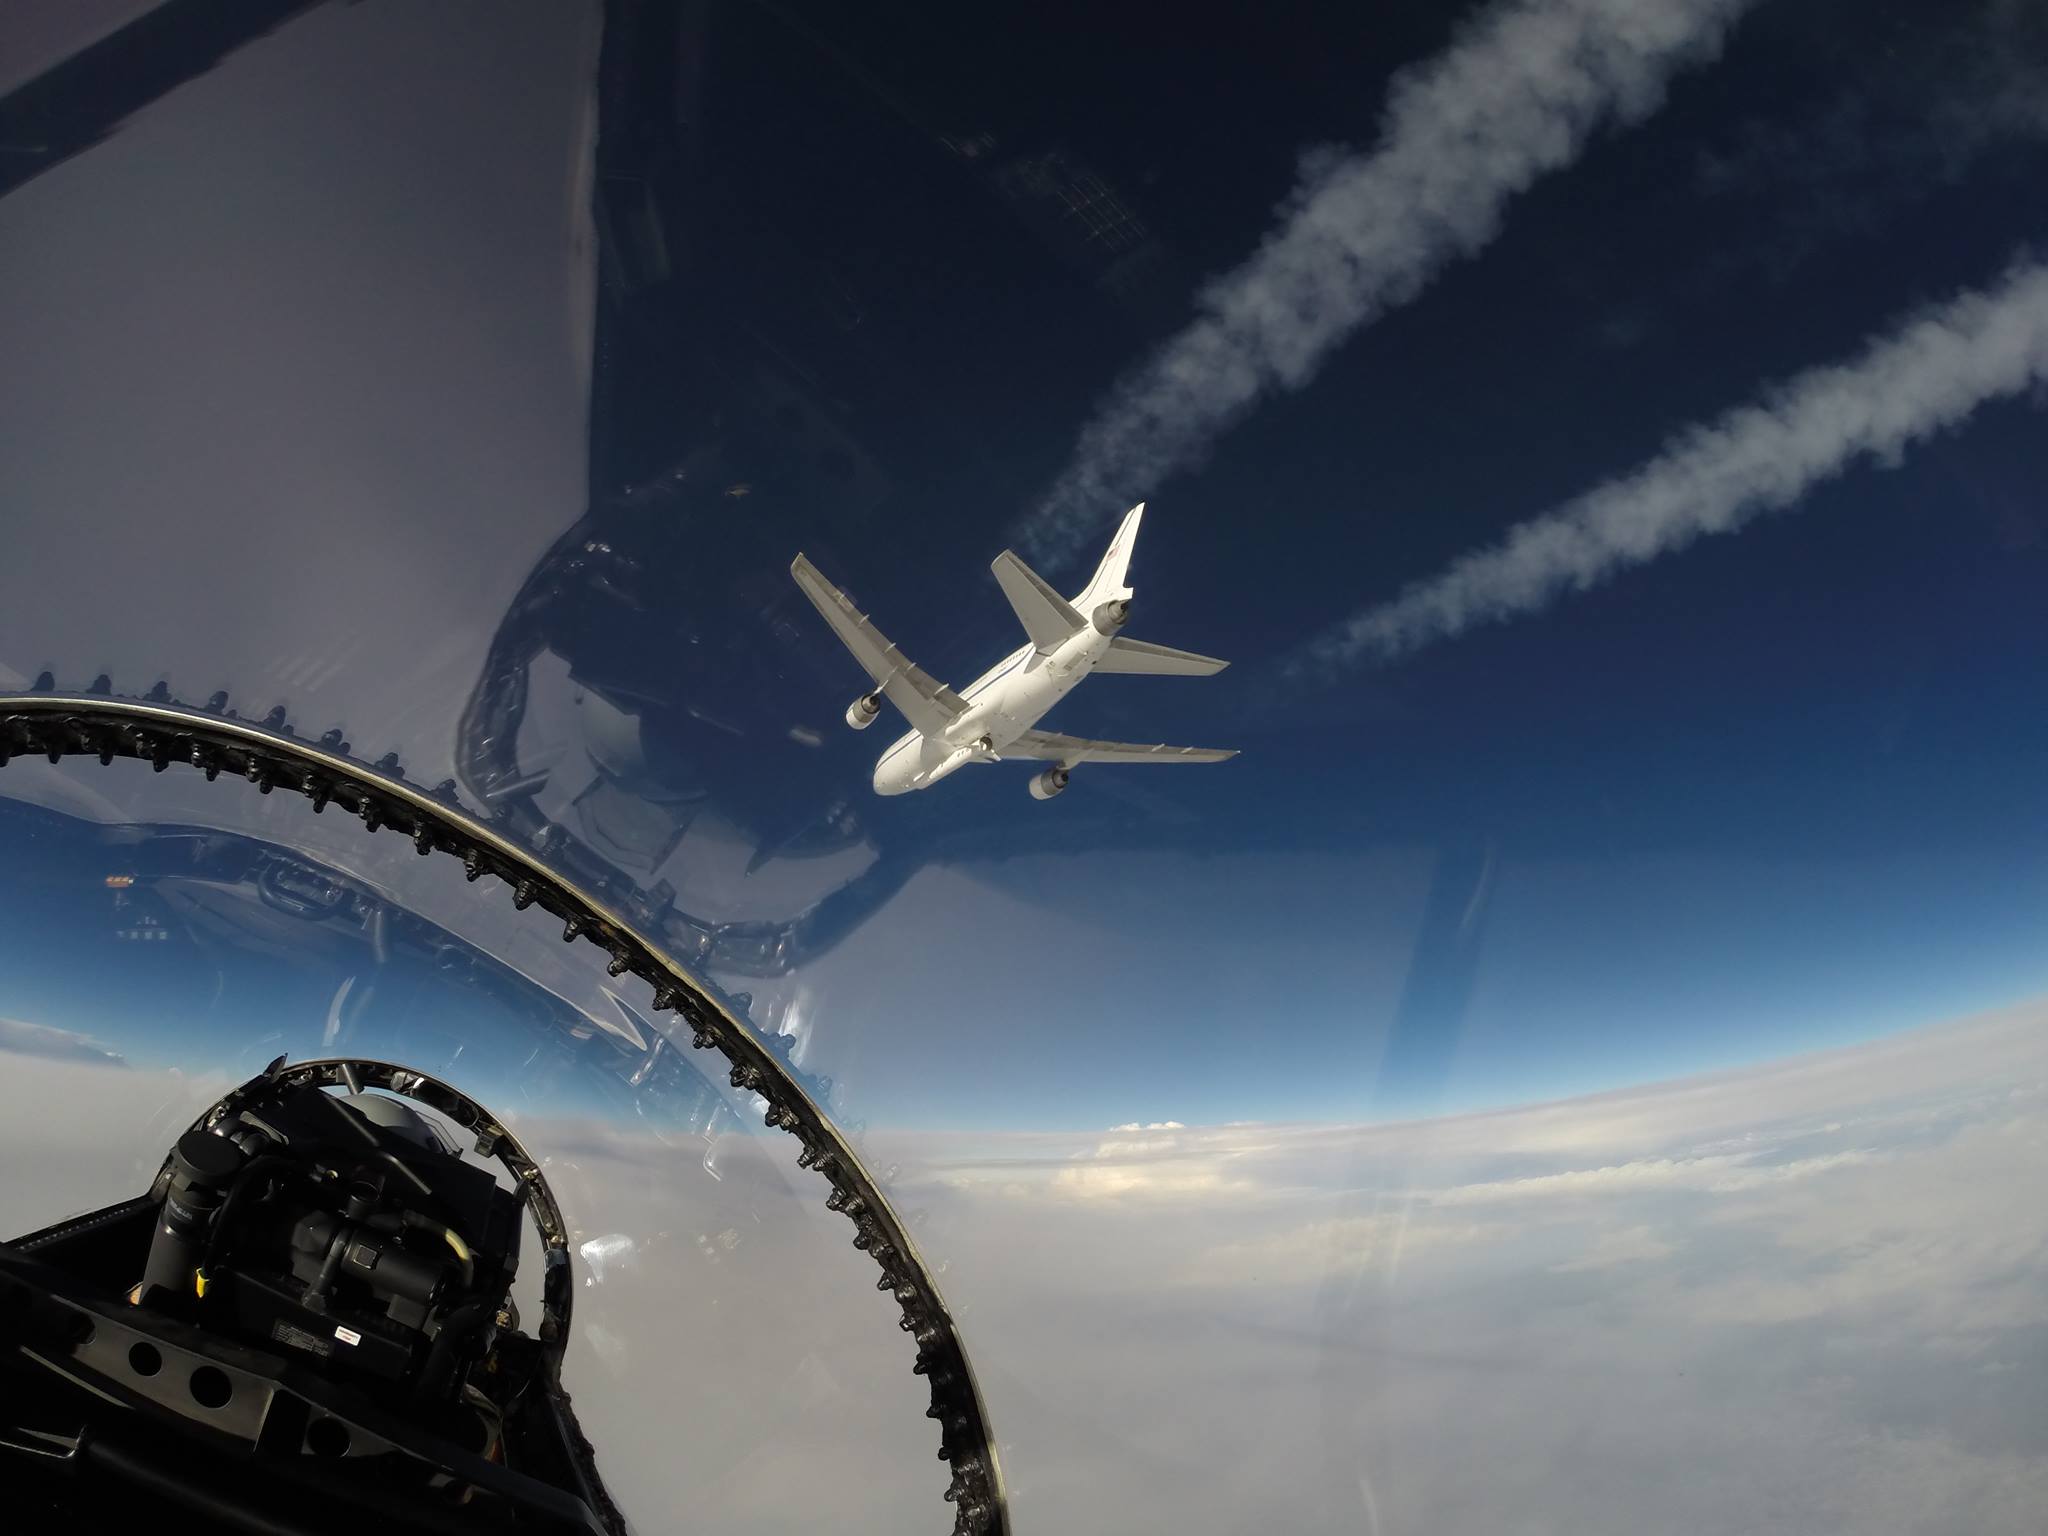 The view of Orbital ATK's L-1011 Stargazer and Pegasus XL rocket (underneath), as seen from the F-18 jet used to provide live coverage of the launch carrying NASA's Cyclone Global Navigation Satellite System (CYGNSS). Flying the F-18 was NASA Test Pilot Troy Asher, with NASA Videographer Lori Losey backseat. Photo Credit: NASA / Lori Losey